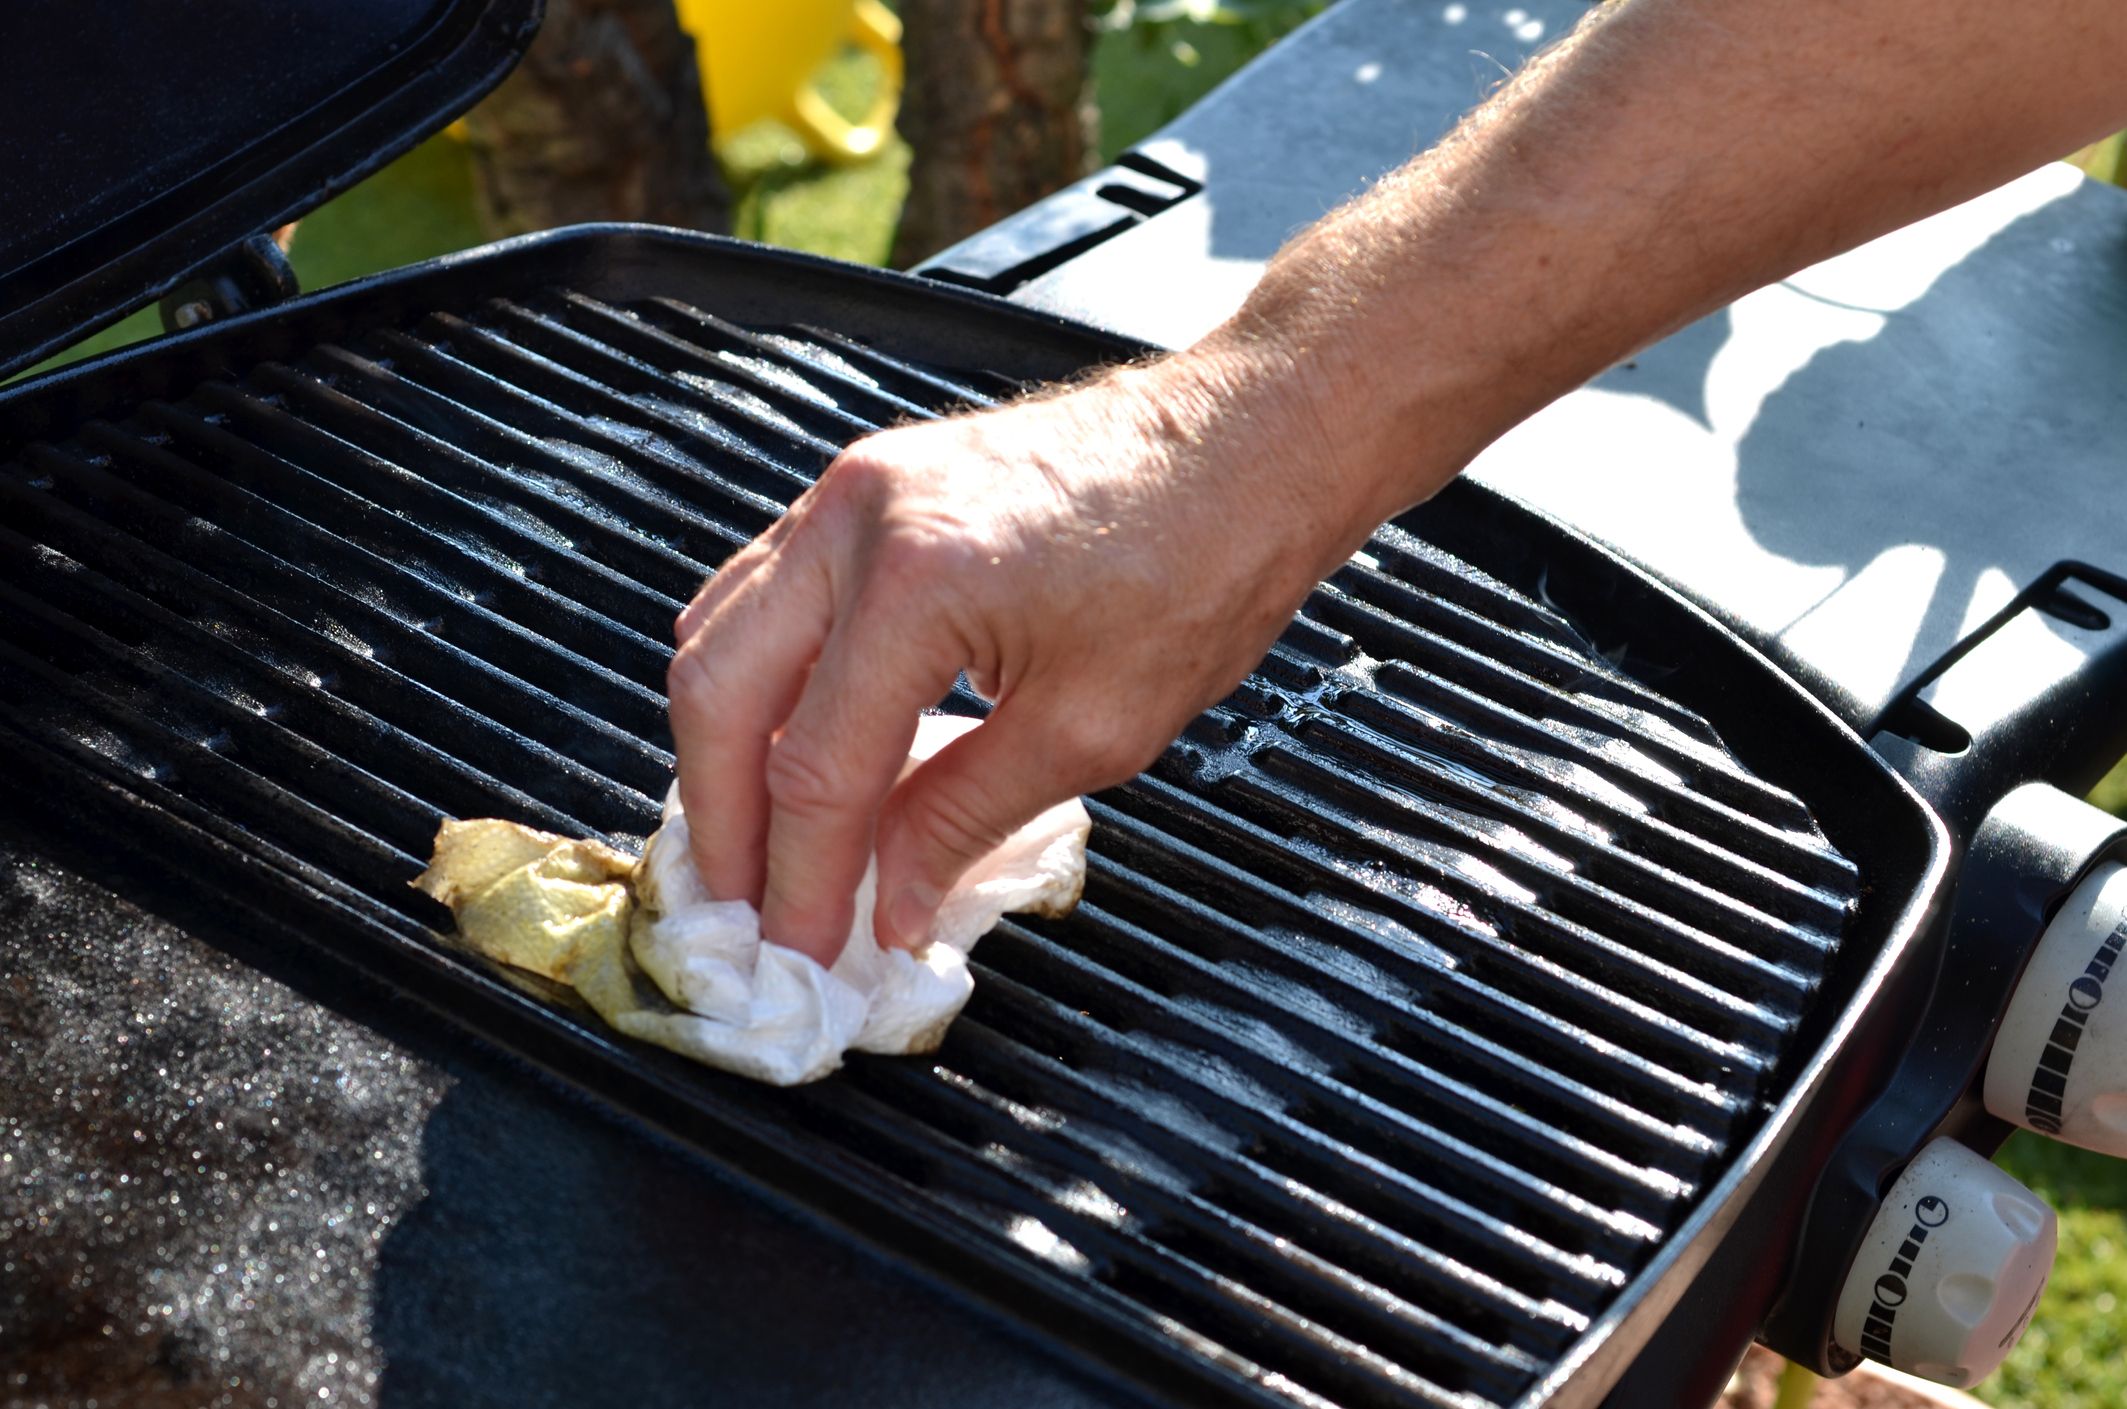 Washing and Wiping Your Grill